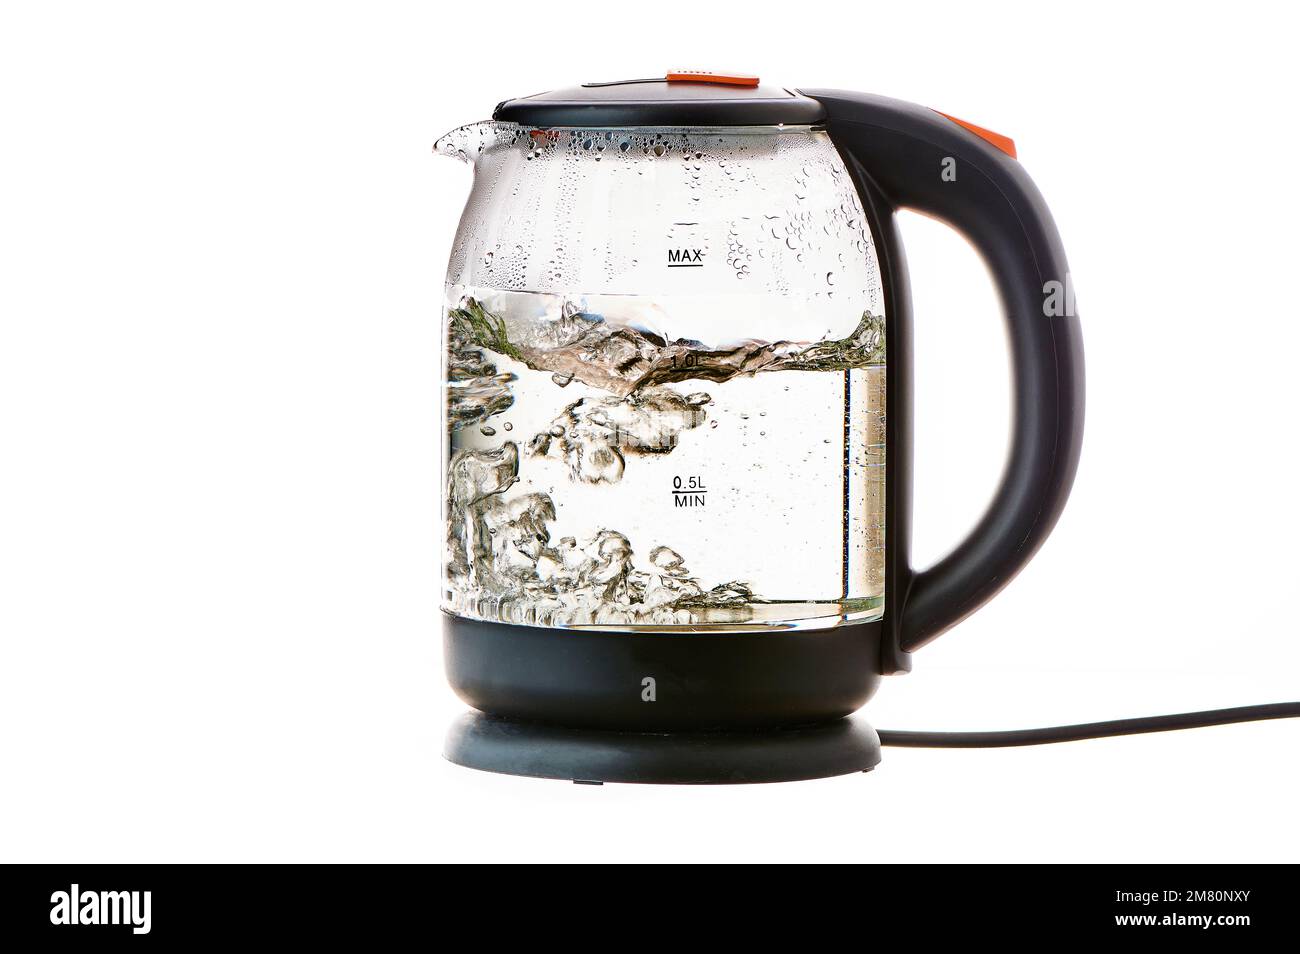 https://c8.alamy.com/comp/2M80NXY/glass-electric-kettle-with-boiling-water-on-a-white-insulated-background-2M80NXY.jpg